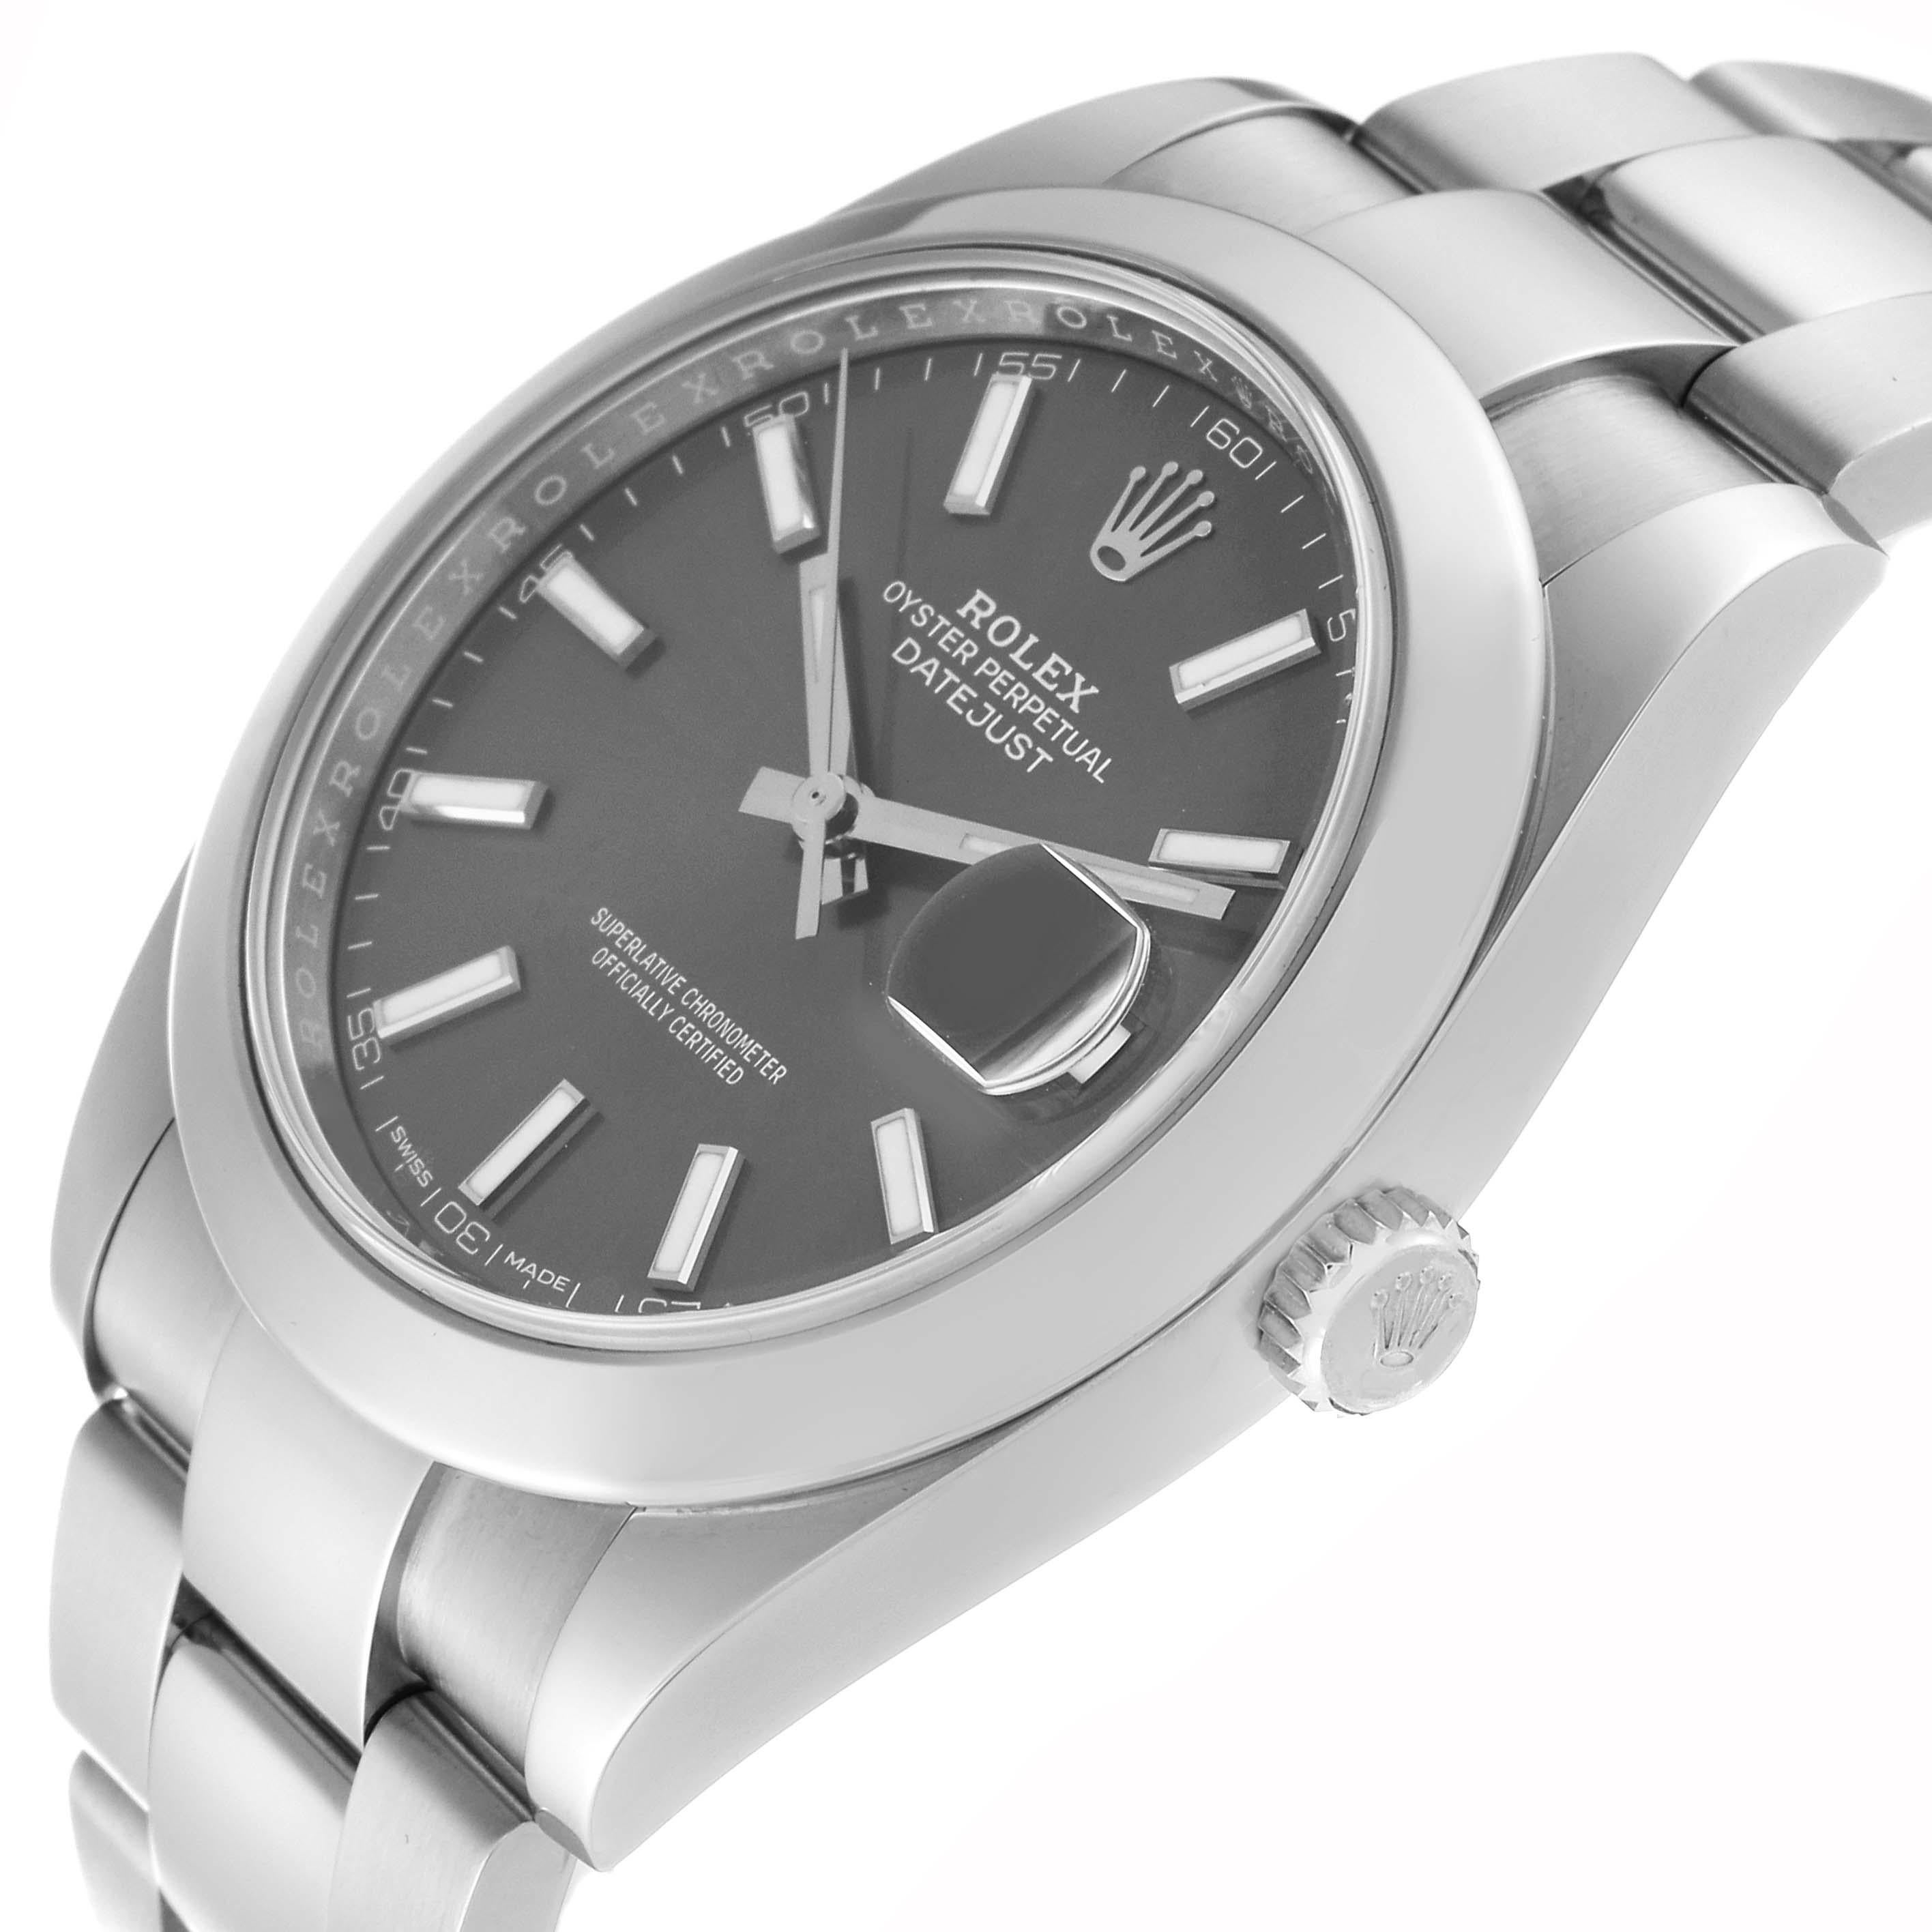 Rolex Datejust 41 Slate Dial Smooth Bezel Steel Mens Watch 126300 For Sale 1